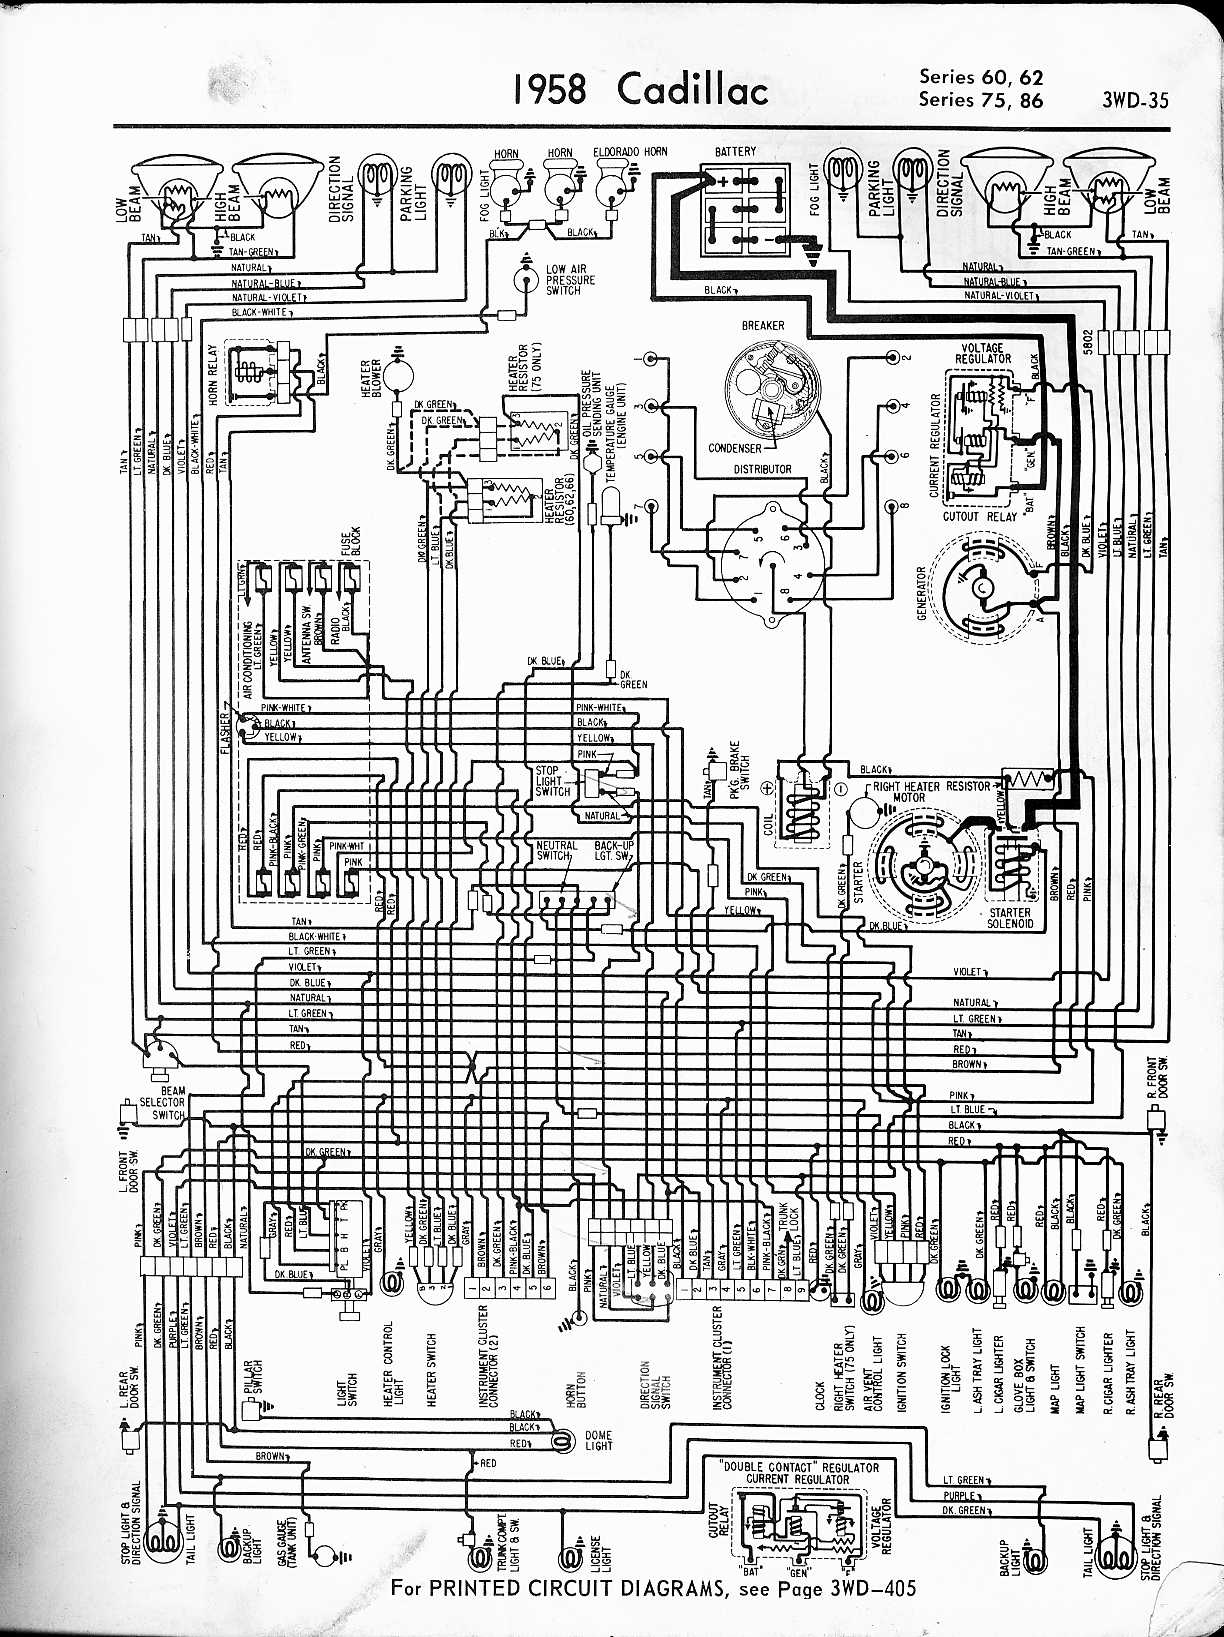 Cadillac Wiring Diagrams: 1957-1965 Ignition Switch Wiring The Old Car Manual Project